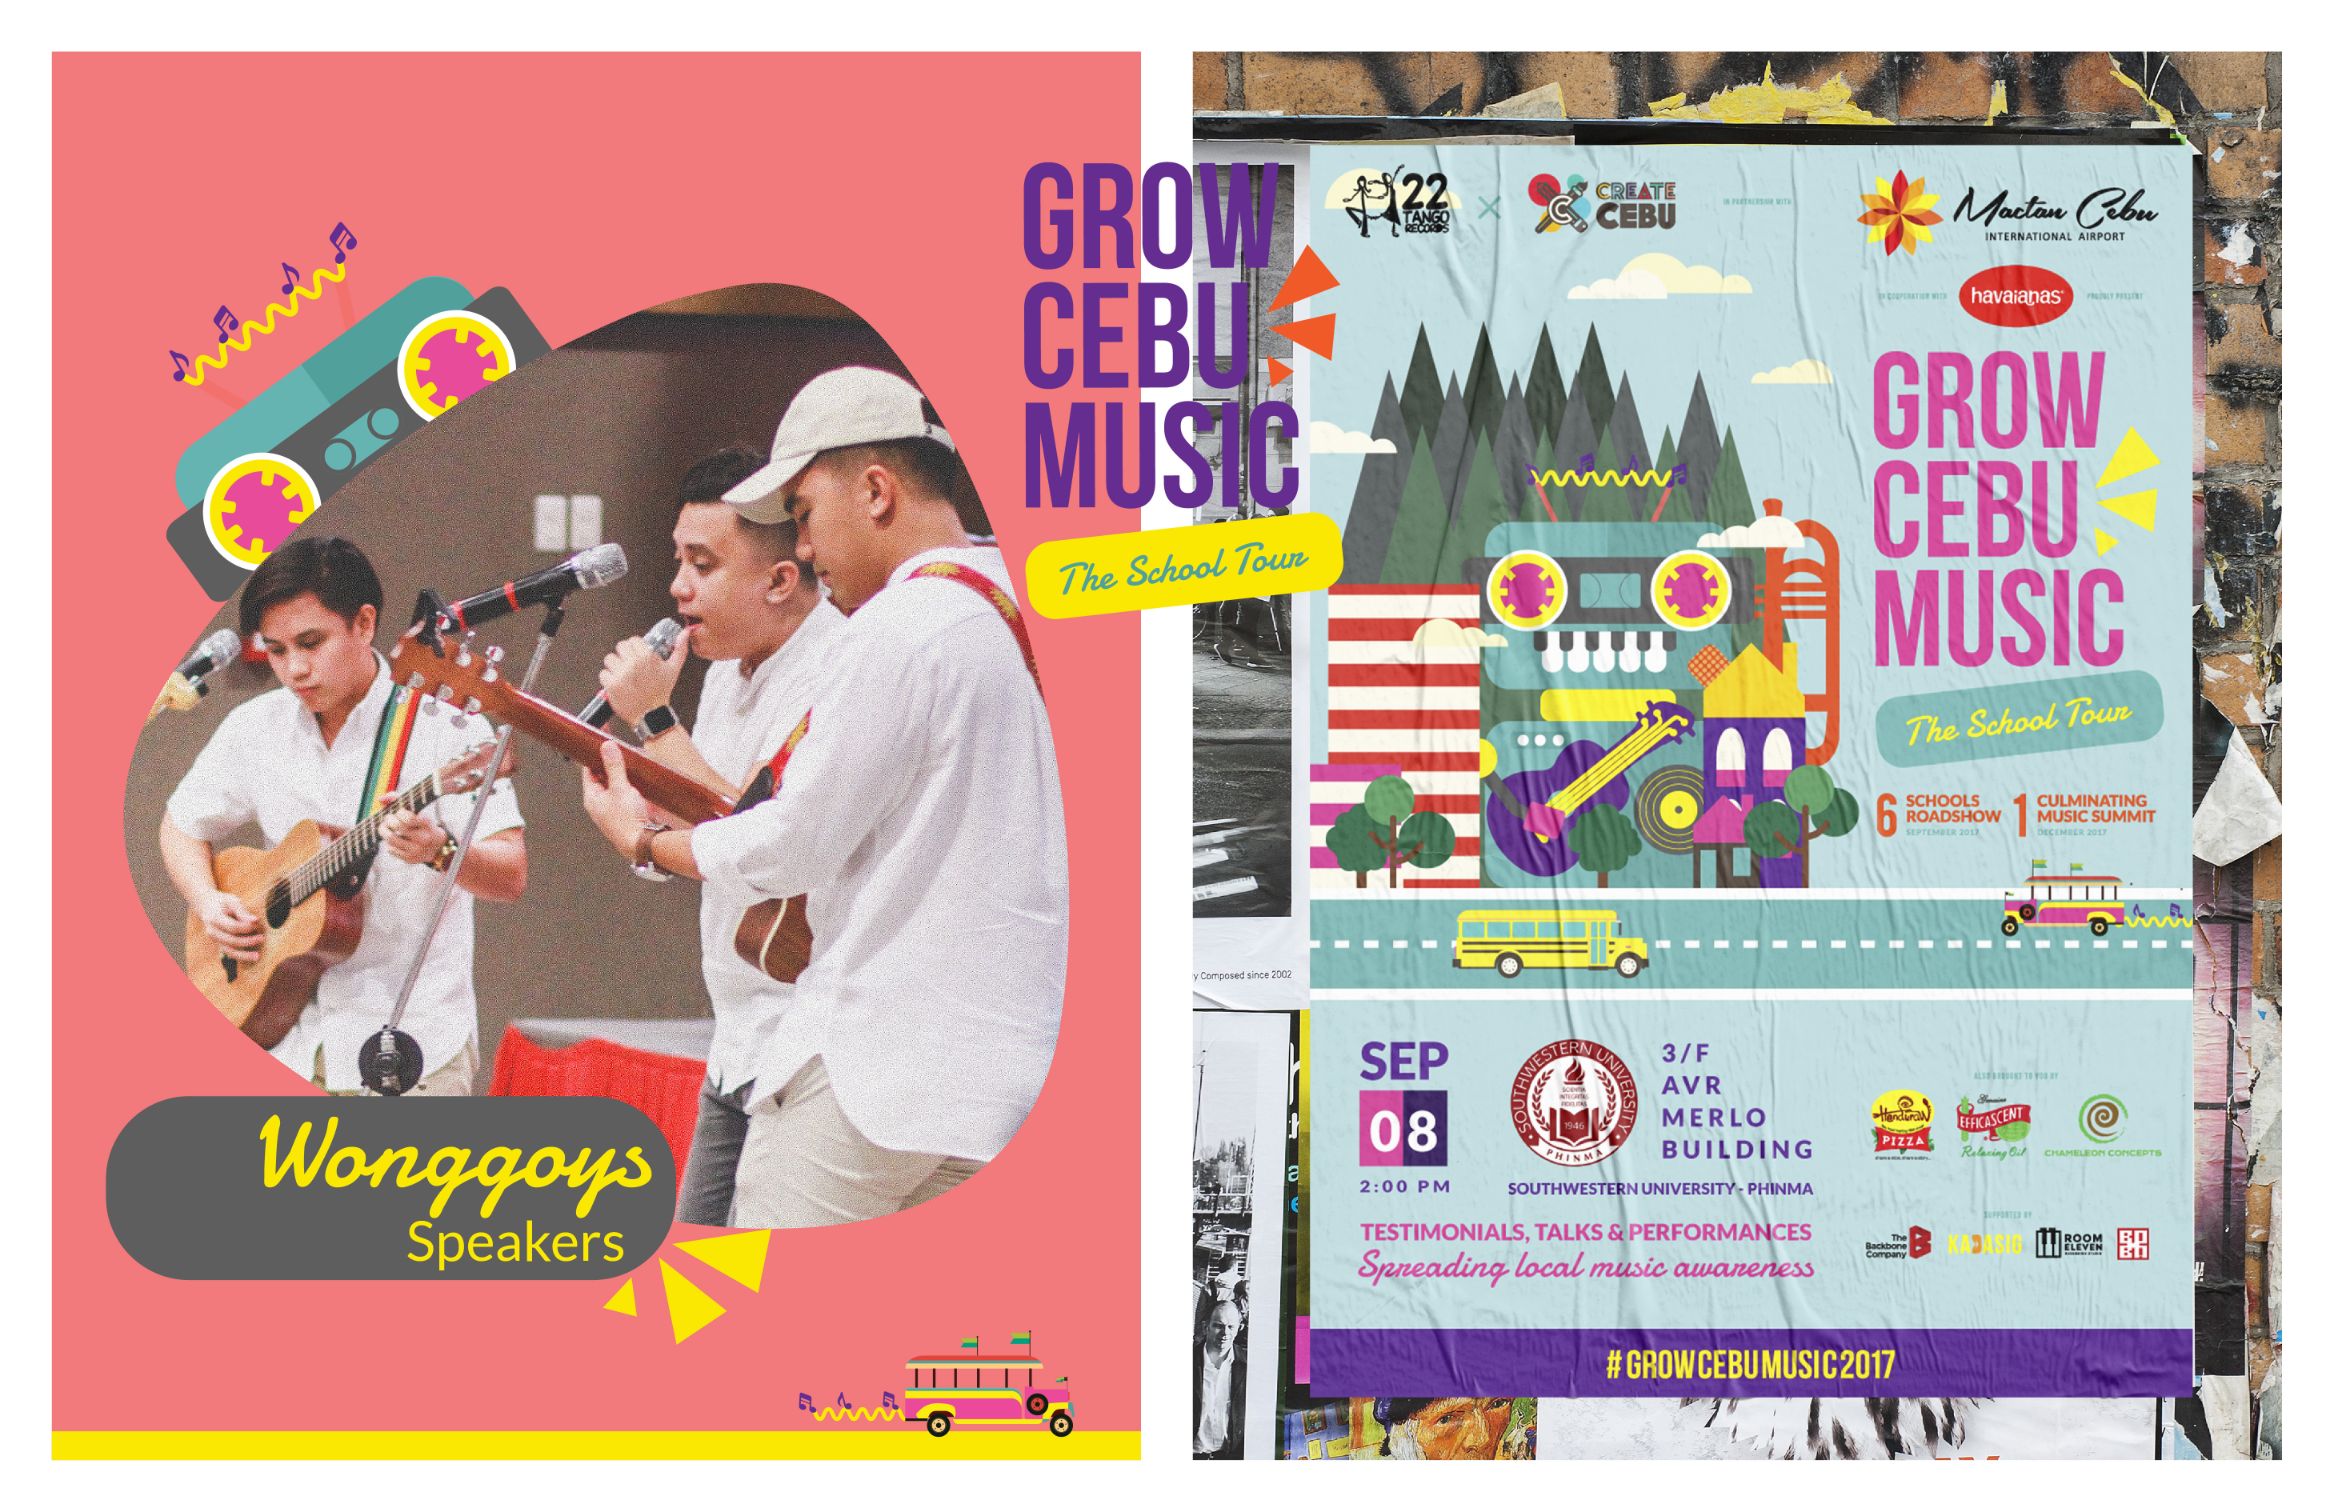 Poster design for the Music Tour with images of the band and illustration of Growbot, the brand mascot